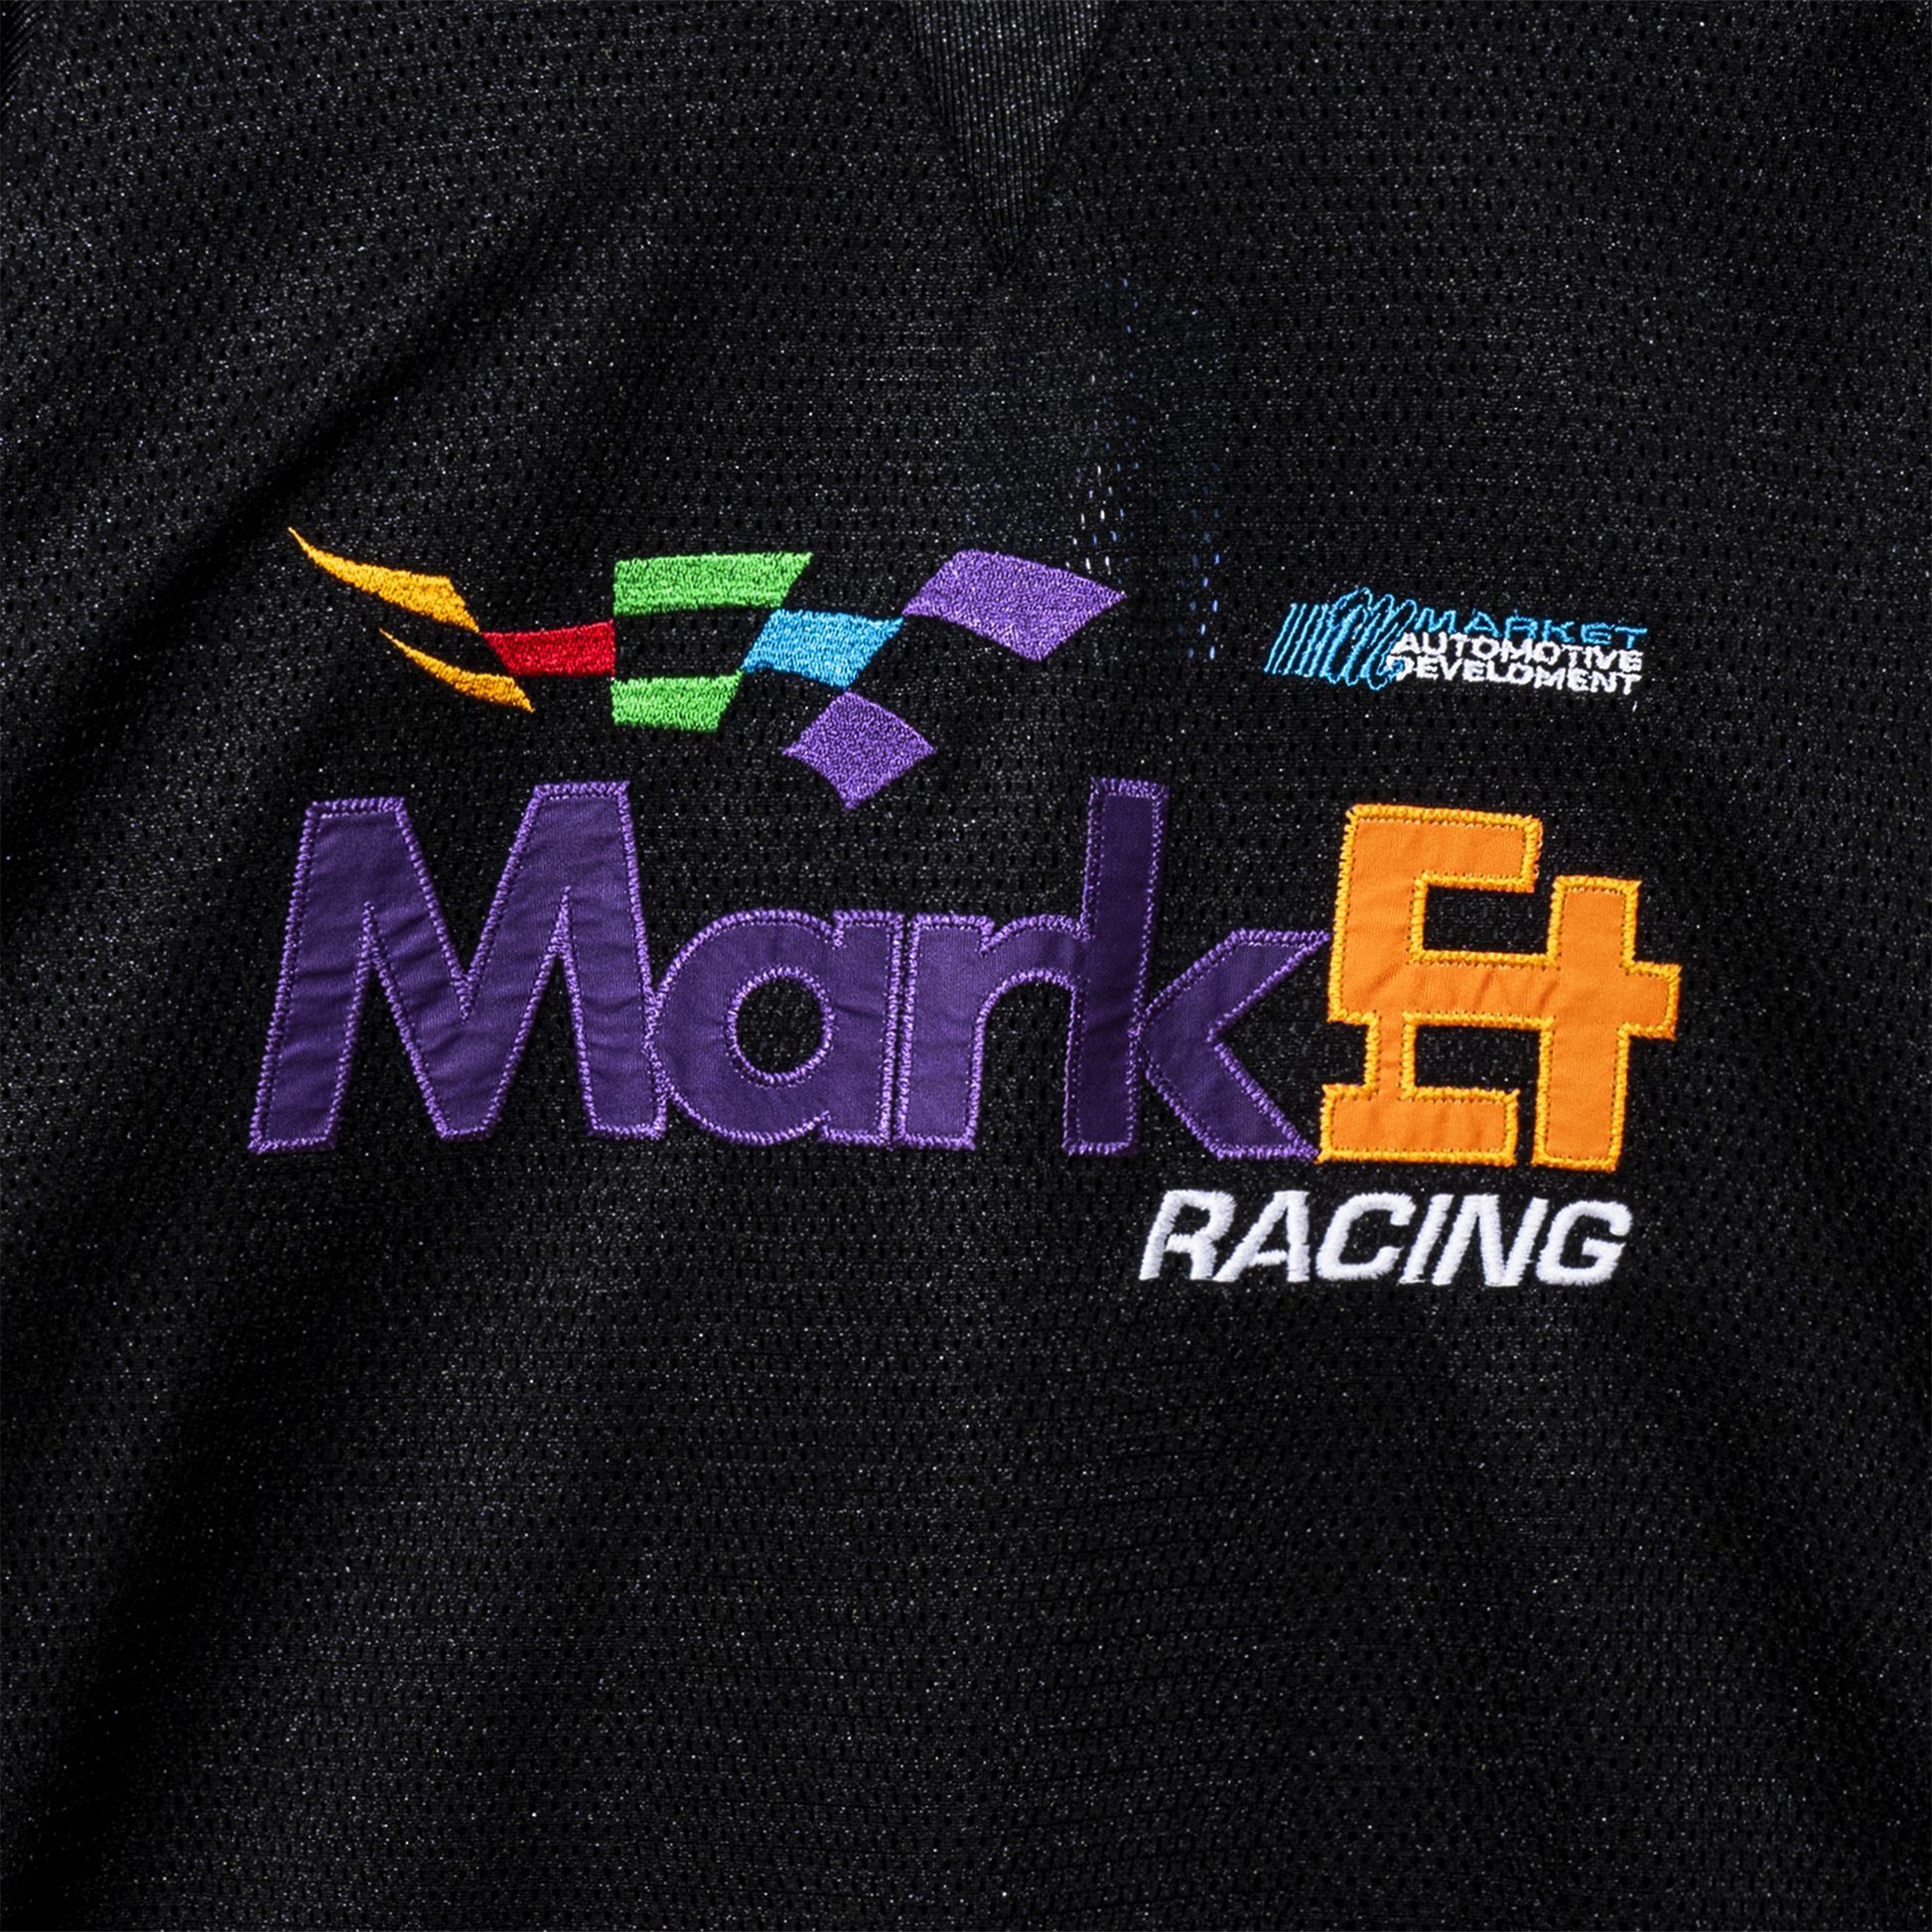 MARKET clothing brand EXPRESS RACING JERSEY. Find more basketballs, sporting goods, homegoods and graphic tees at MarketStudios.com. Formally Chinatown Market. 